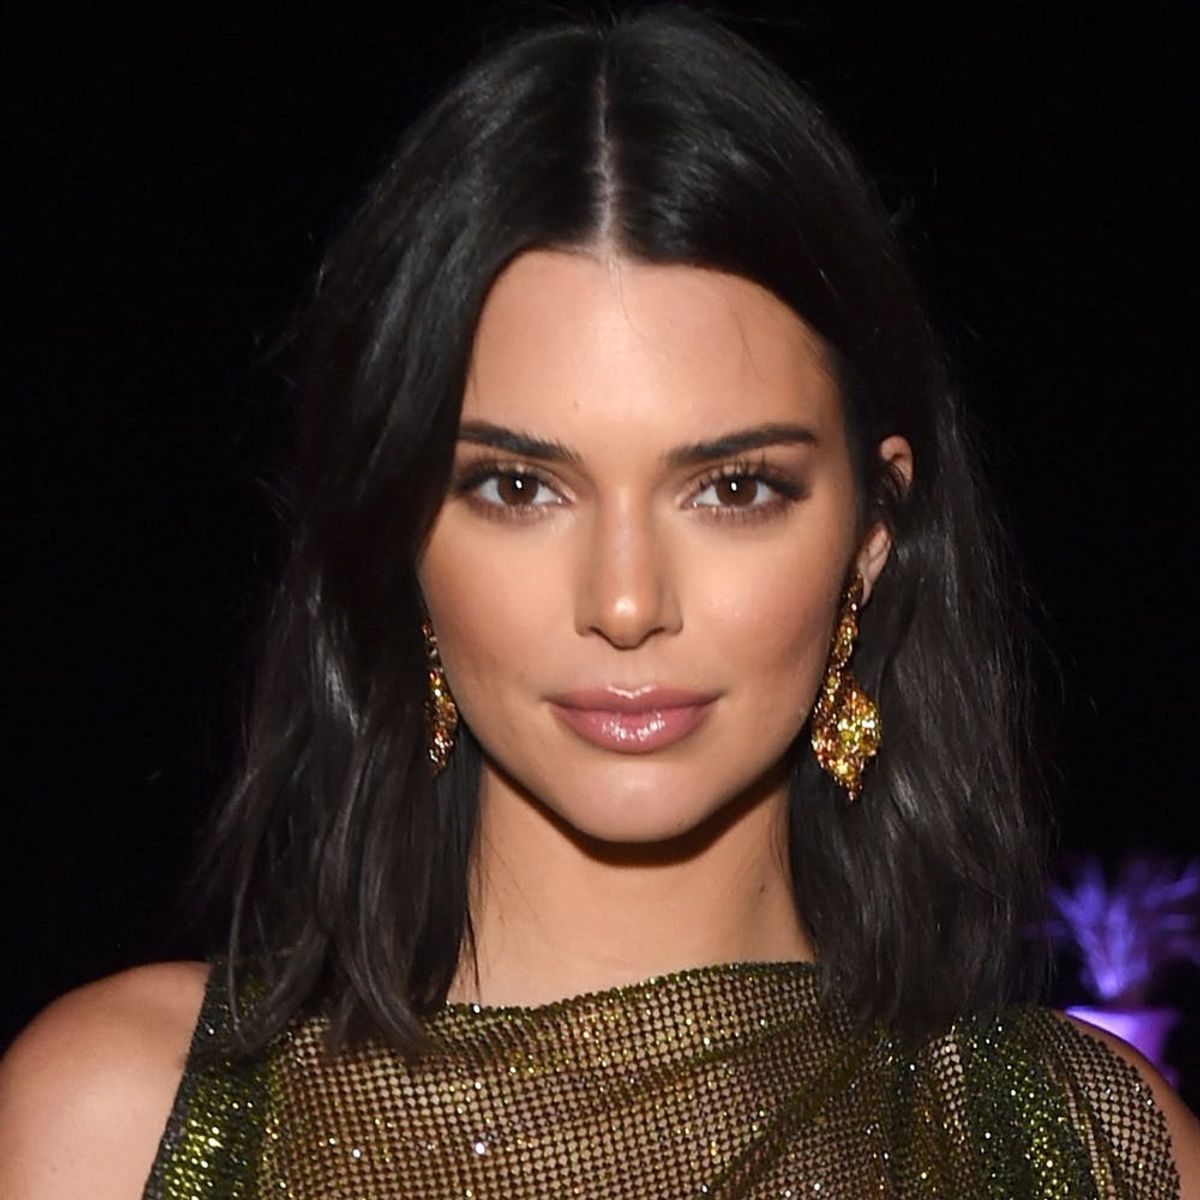 Kendall Jenner Is Freeing the Nipple on the 2018 Cannes Red Carpet